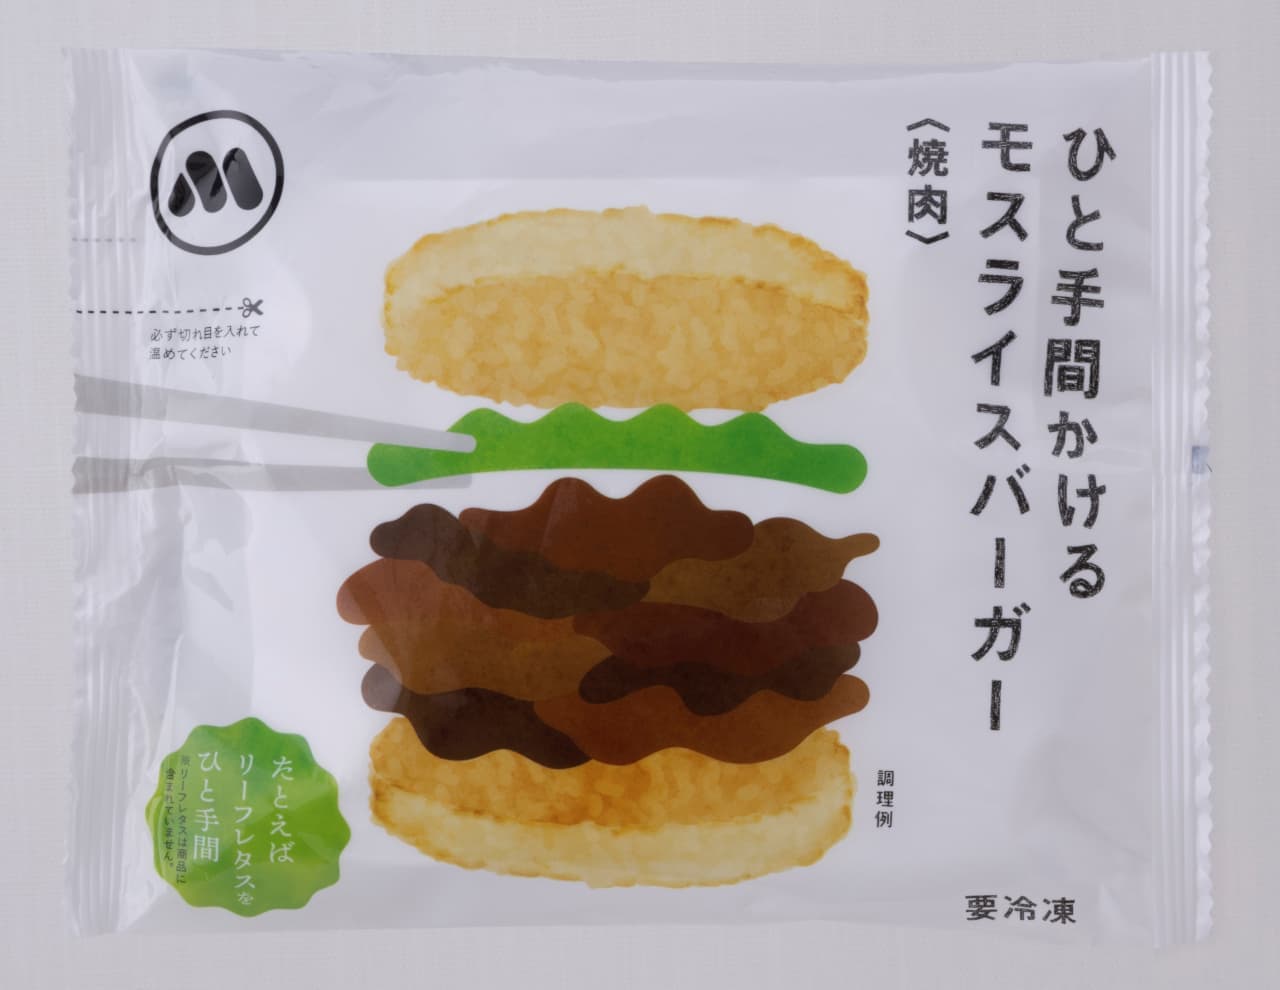 Mos Burger "One-Step Mos Rice Burger [Yakiniku]" and more at the official online store.